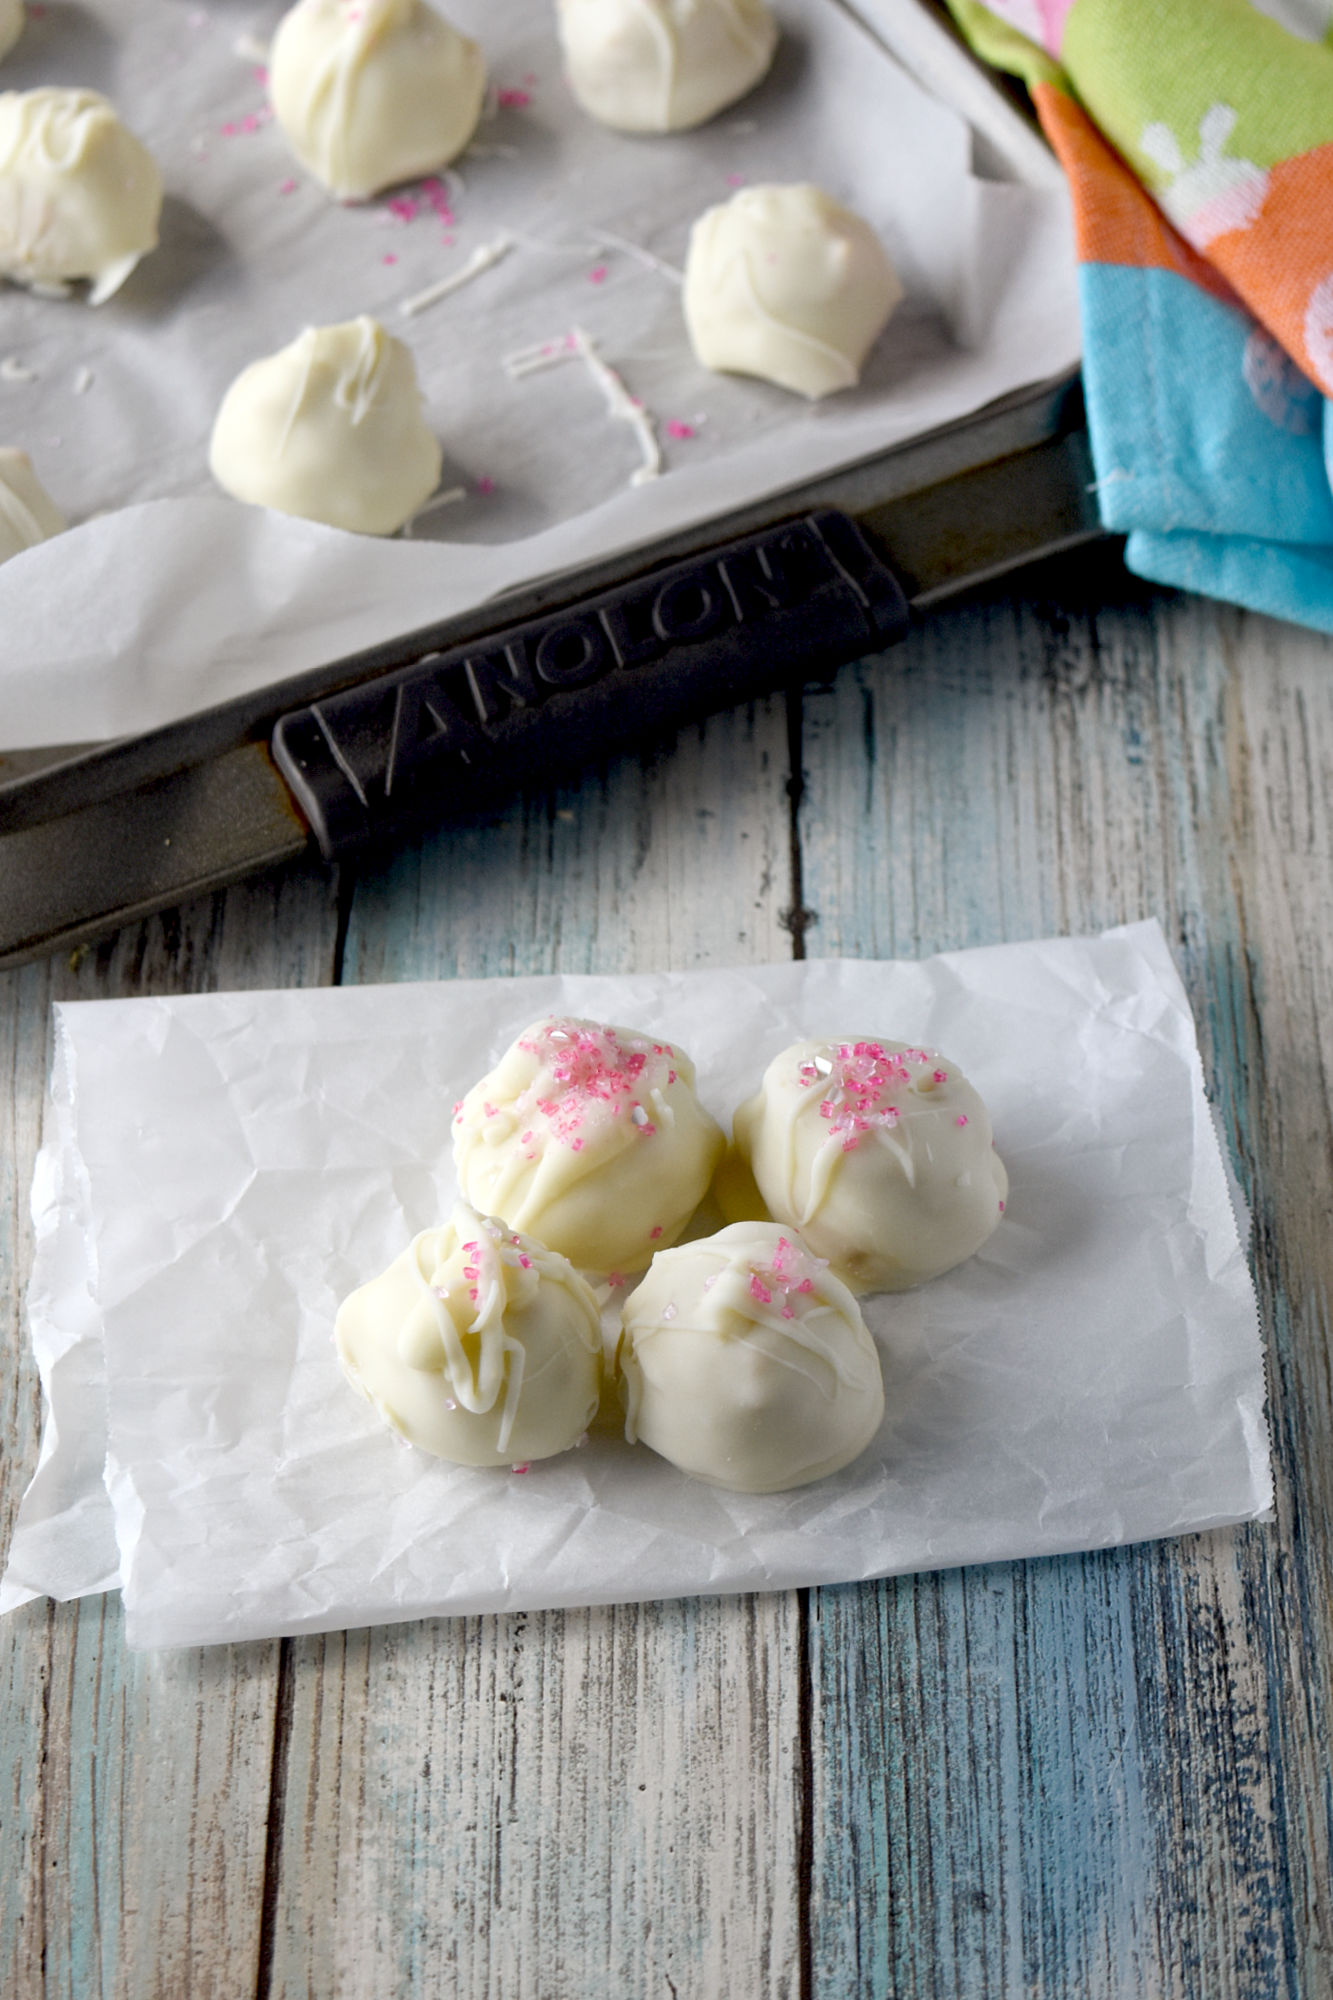 Meyer Lemon Ginger Cookie Truffles are vibrant and full of ginger flavor with a hint of lemon. The stem ginger cookies are the perfect pairing with bright, Meyer lemons making these absolutely perfect for spring. #SpringSweetsWeek